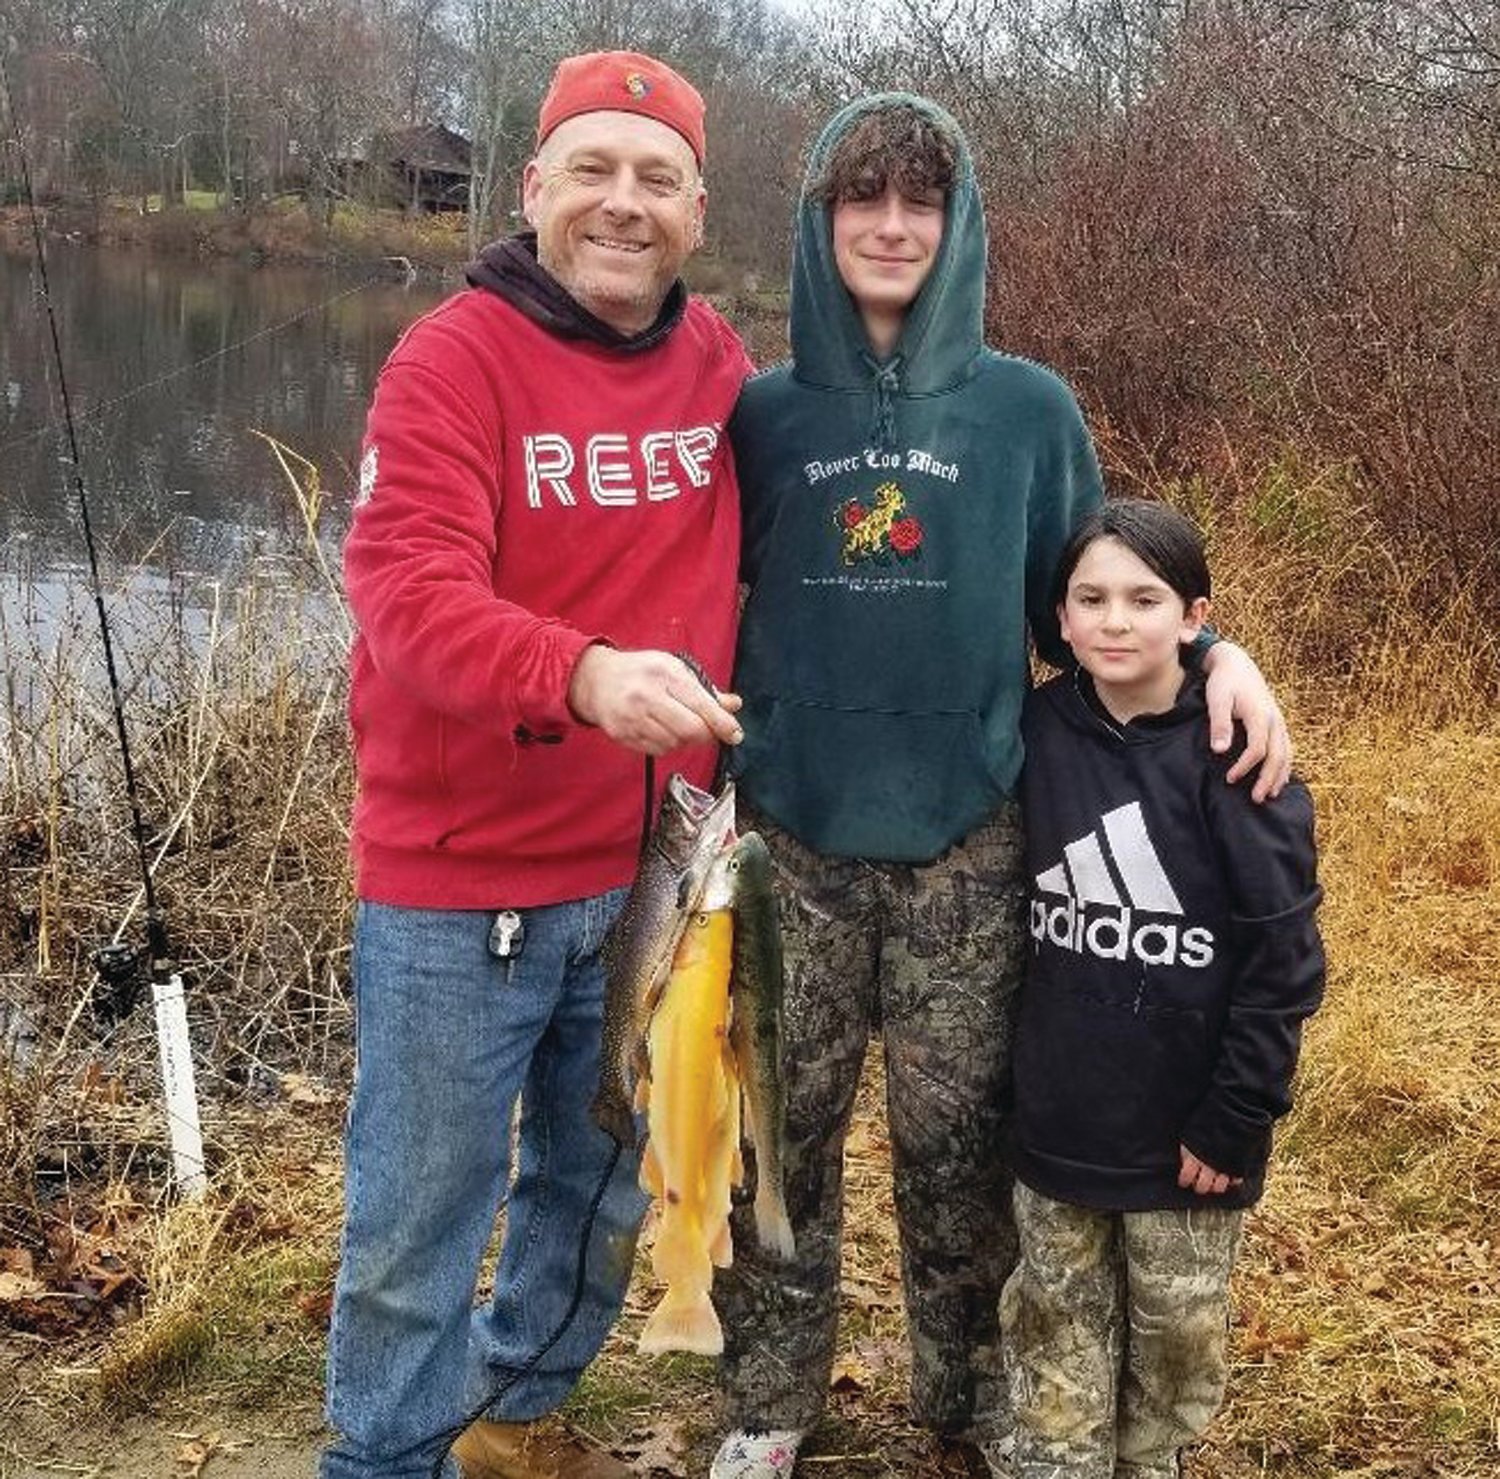 GOLDEN TROUT BIG HIT: Kevin Tierney of Burrillville fished with his stepsons Camryn Lions and Geo Curtis on opening day.  The trio caught seven trout including two golden trout.  (Submitted photo)